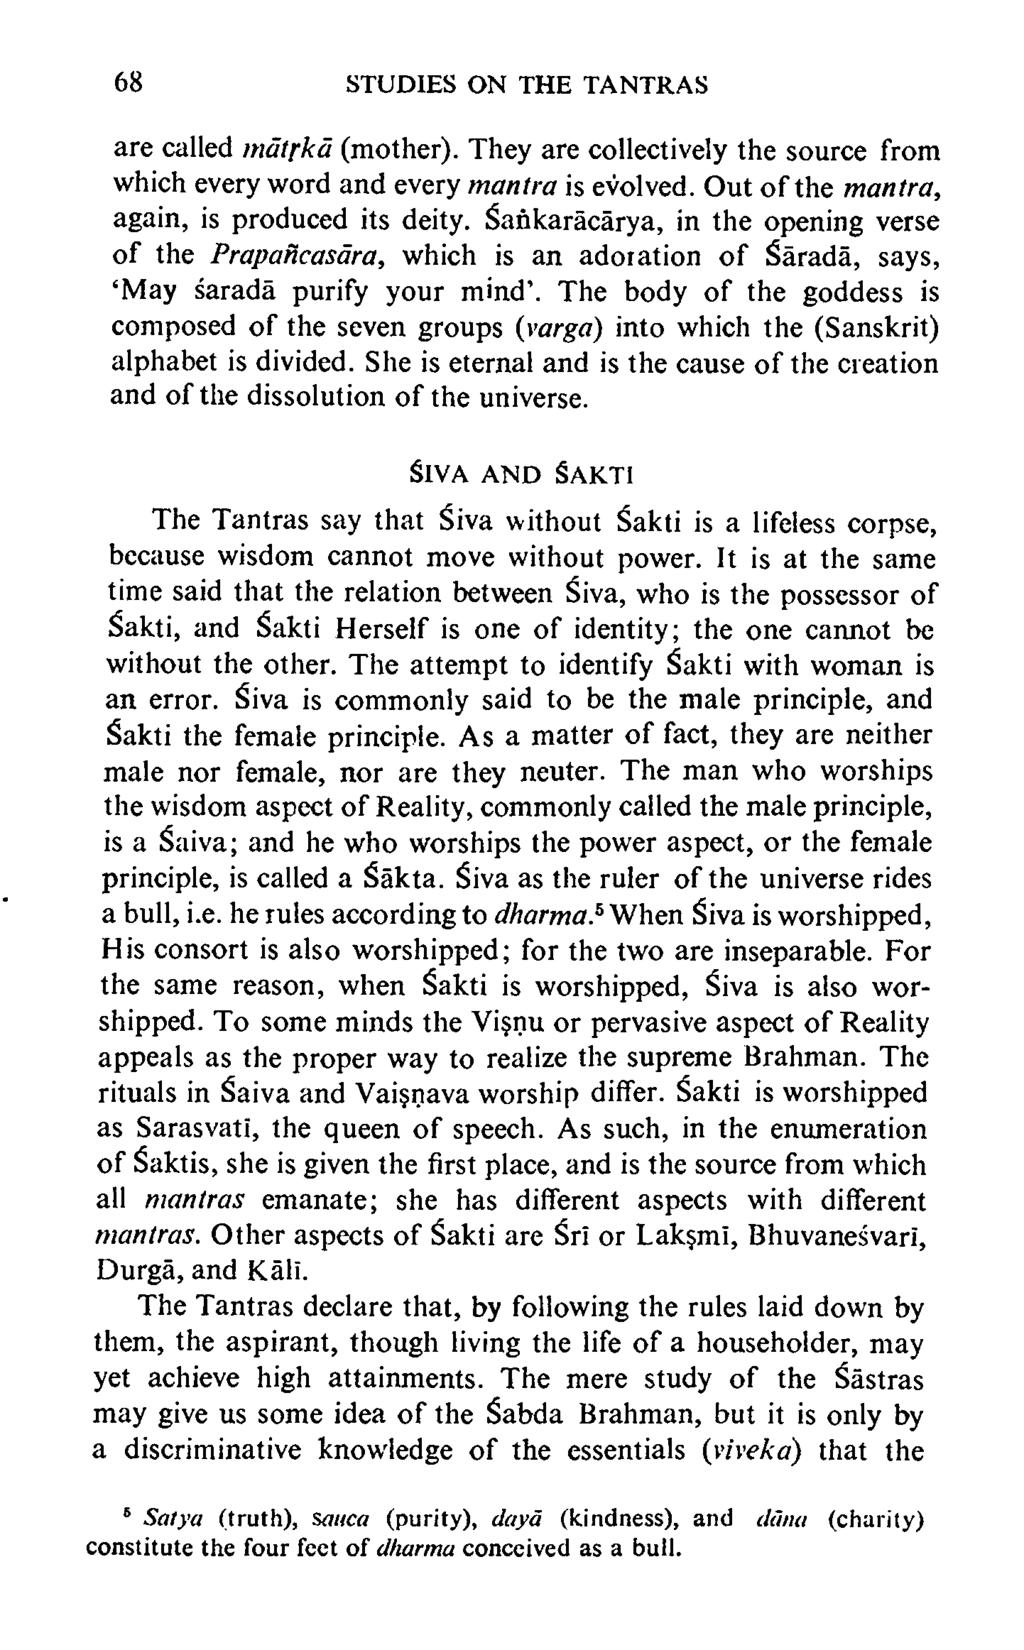 68 STUDIES ON THE TANTRAS are called matfka (mother). They are collectively the source from which every word and every mantra is evolved. Out o f the mantra, again, is produced its deity.